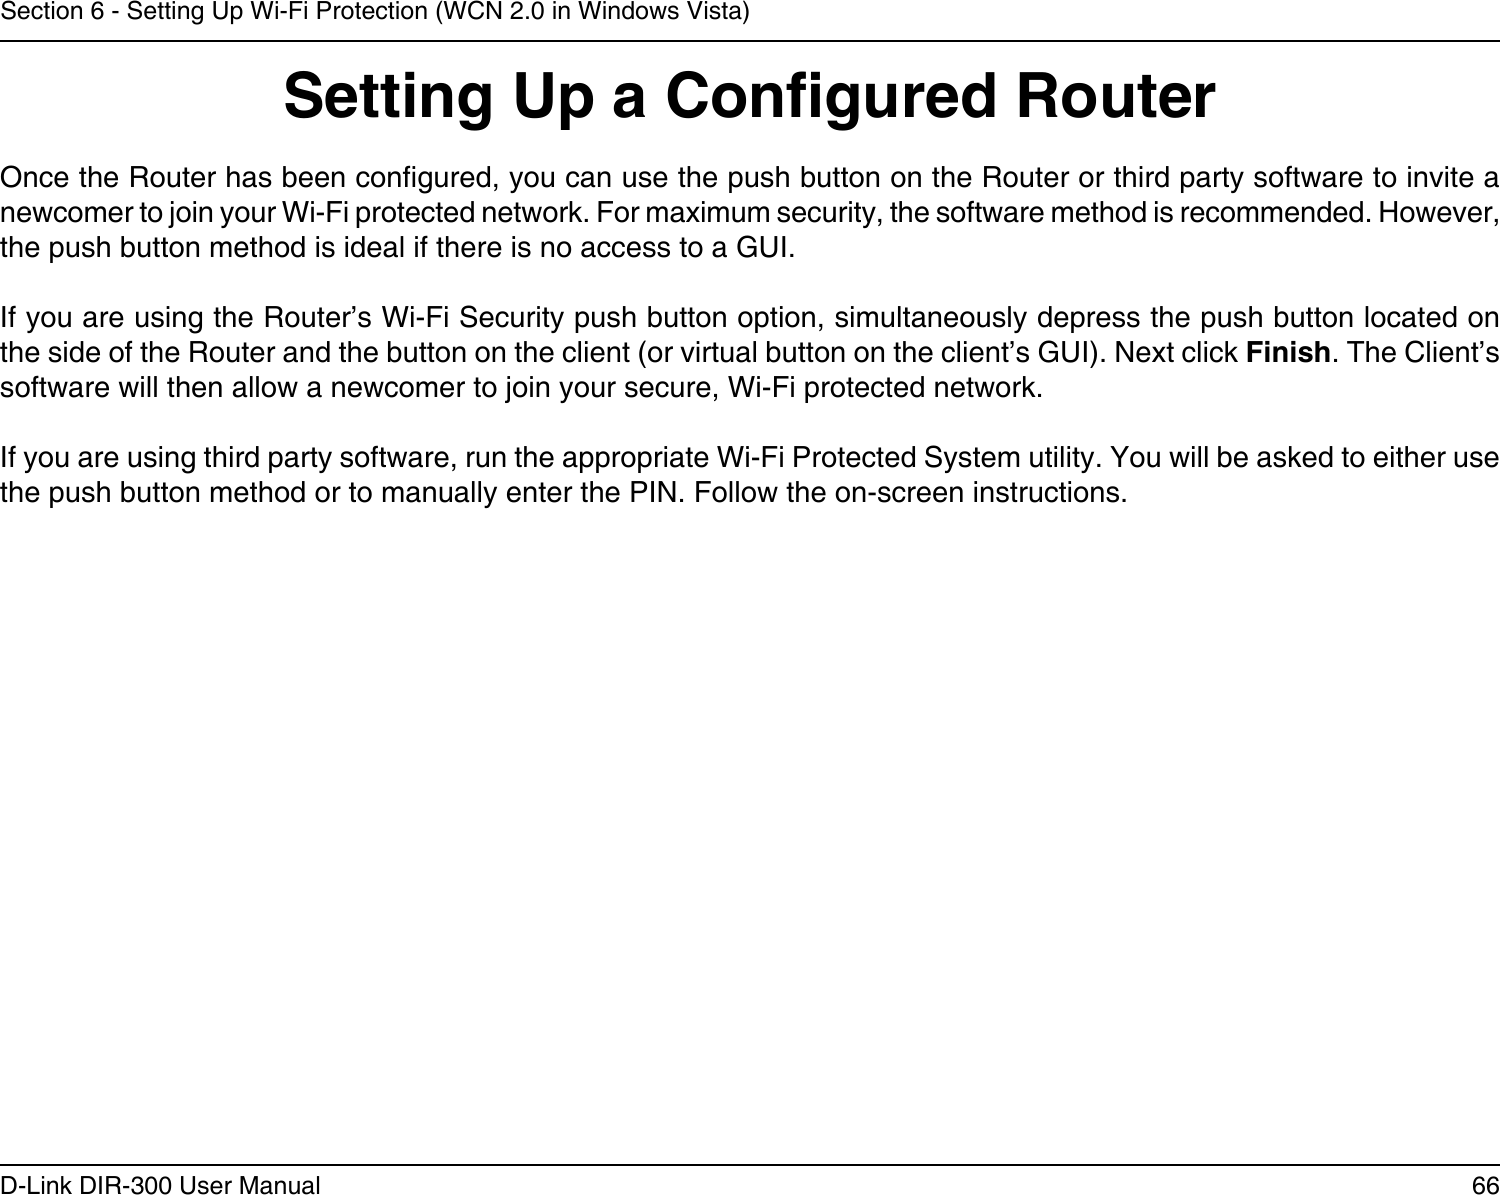 66D-Link DIR-300 User ManualSection 6 - Setting Up Wi-Fi Protection (WCN 2.0 in Windows Vista)Setting Up a Congured RouterOnce the Router has been congured, you can use the push button on the Router or third party software to invite a newcomer to join your Wi-Fi protected network. For maximum security, the software method is recommended. However, the push button method is ideal if there is no access to a GUI.If you are using the Router’s Wi-Fi Security push button option, simultaneously depress the push button located on the side of the Router and the button on the client (or virtual button on the client’s GUI). Next click Finish. The Client’s software will then allow a newcomer to join your secure, Wi-Fi protected network.If you are using third party software, run the appropriate Wi-Fi Protected System utility. You will be asked to either use the push button method or to manually enter the PIN. Follow the on-screen instructions.        